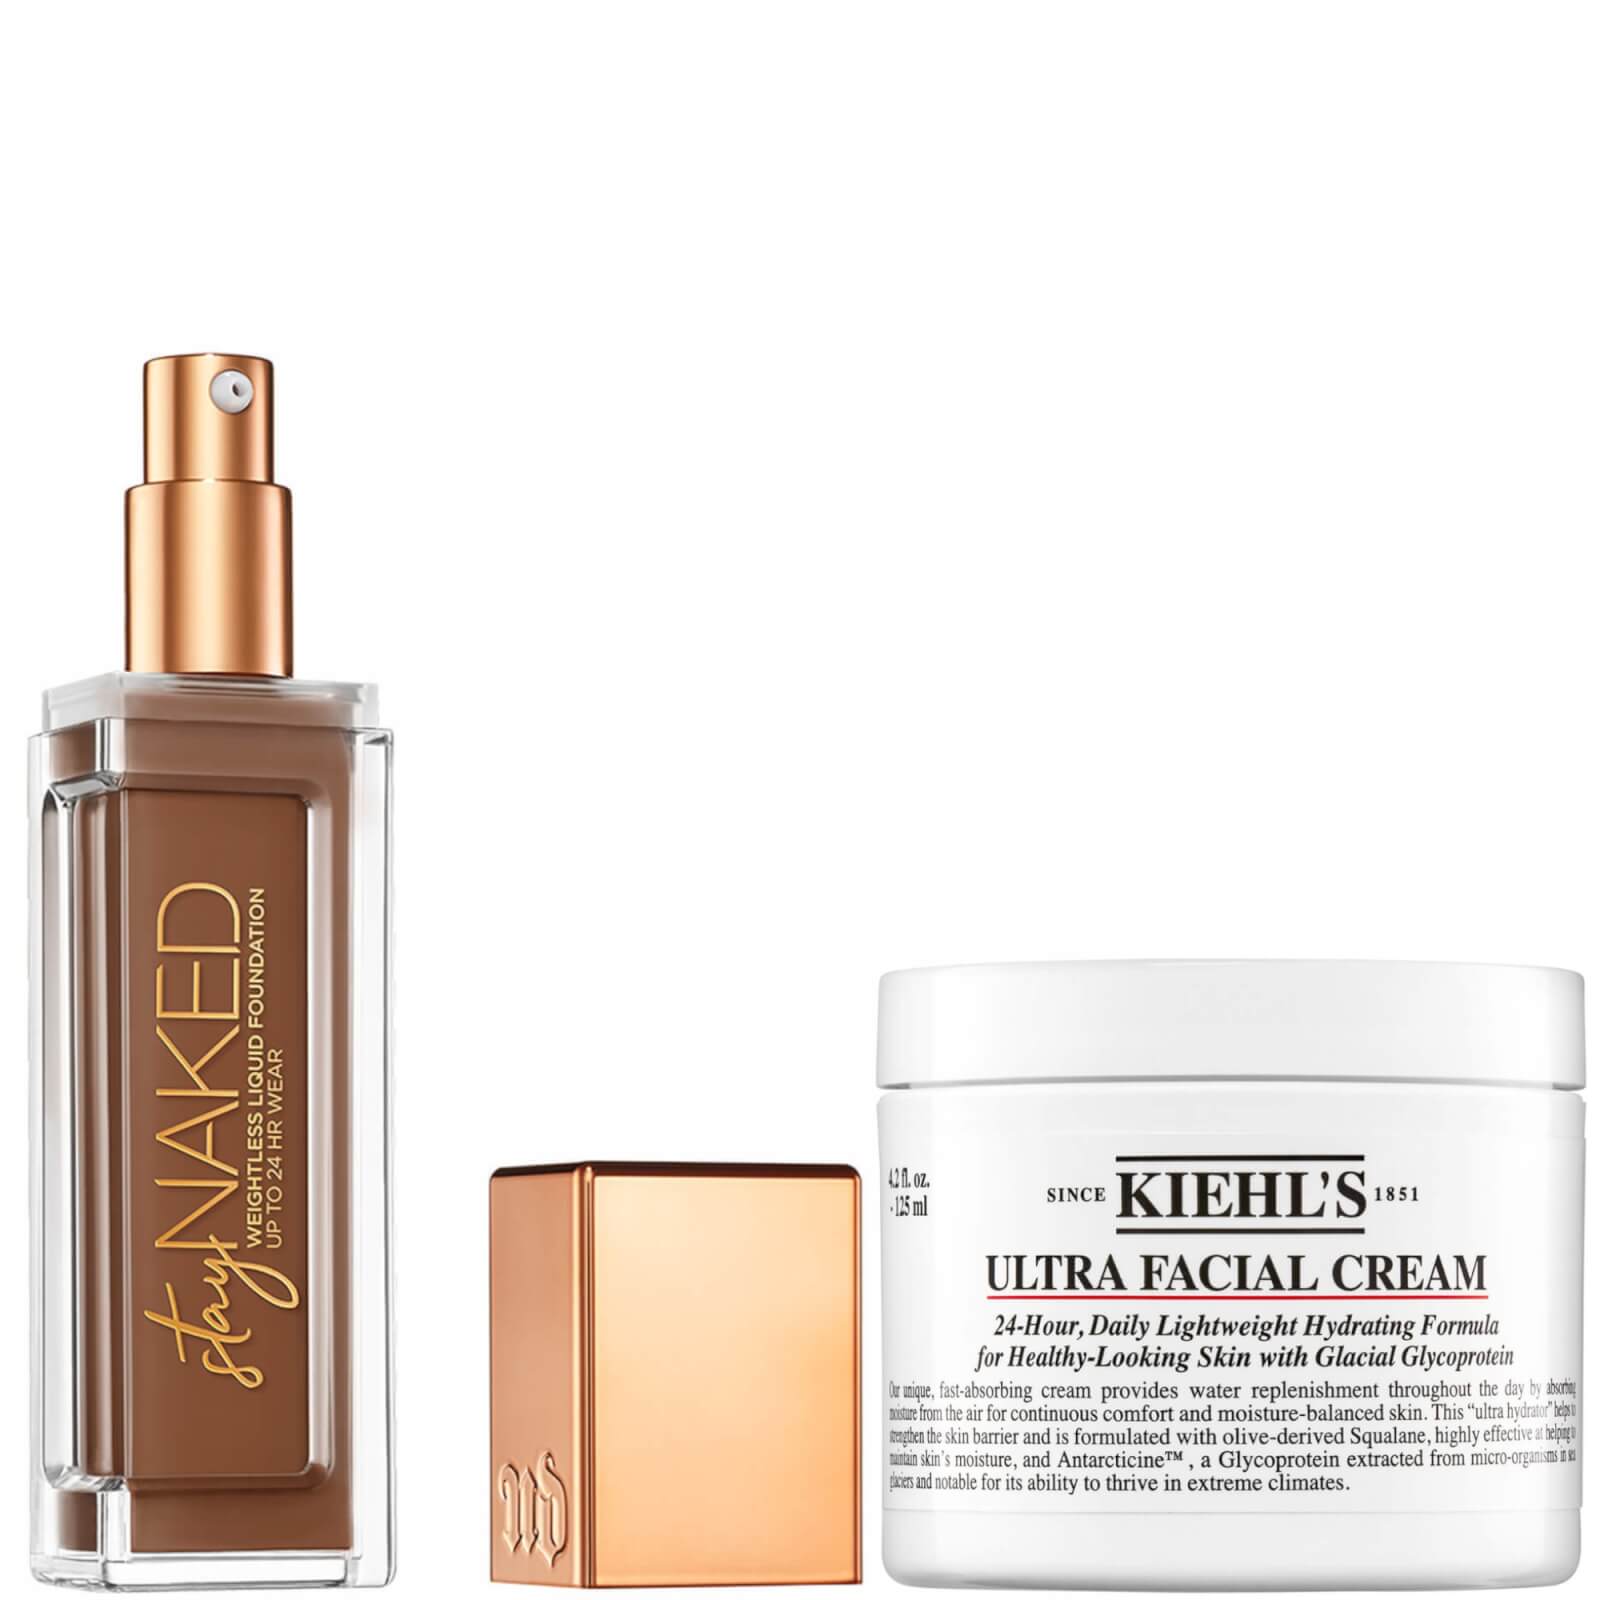 Urban Decay Stay Naked Foundation x Kiehl's Ultra Facial Cream 50ml Bundle (Various Shades) - 70WR